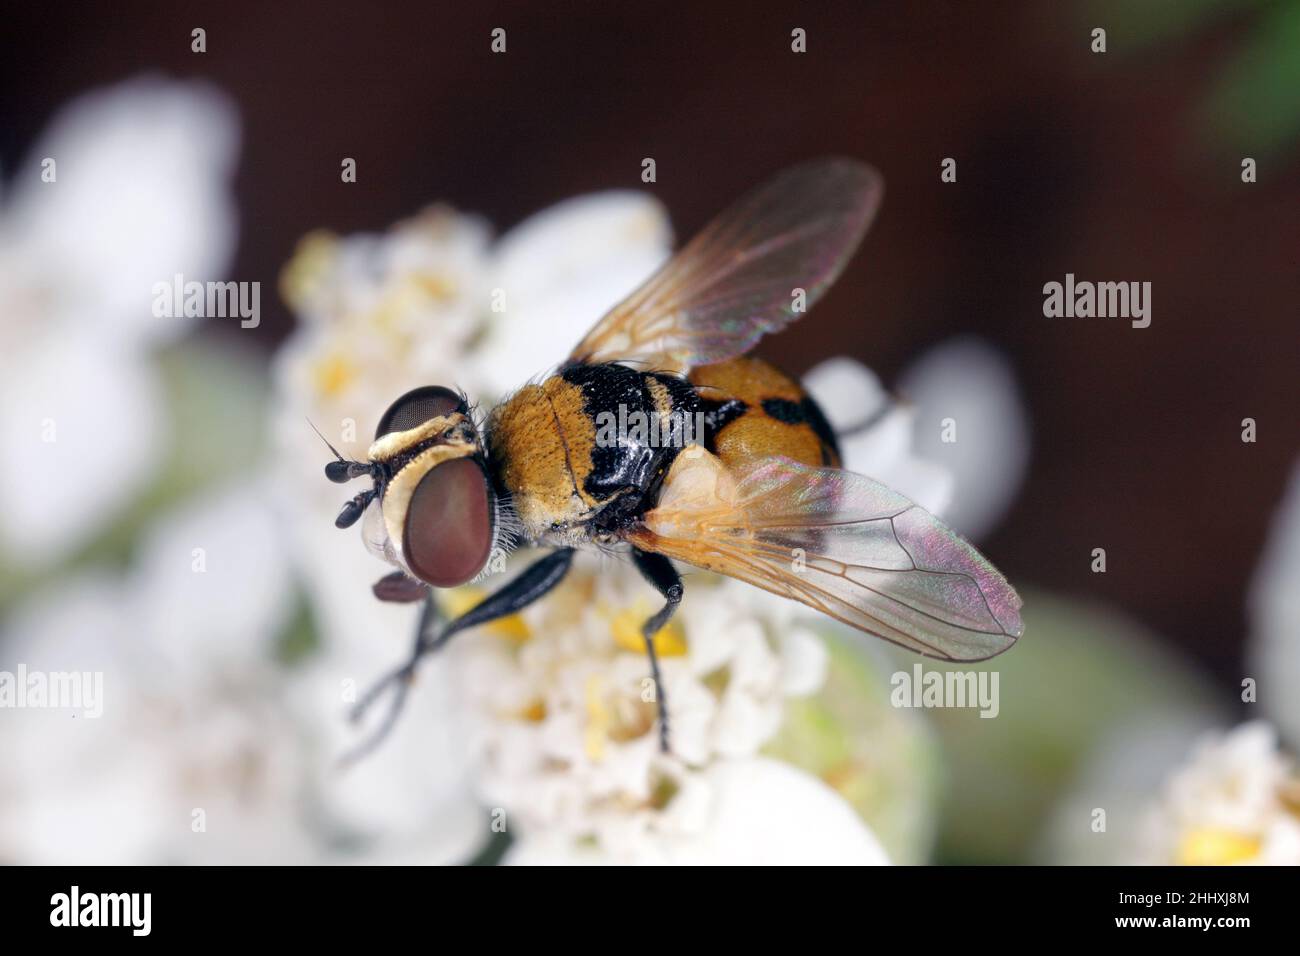 A small fly on a flower. Stock Photo